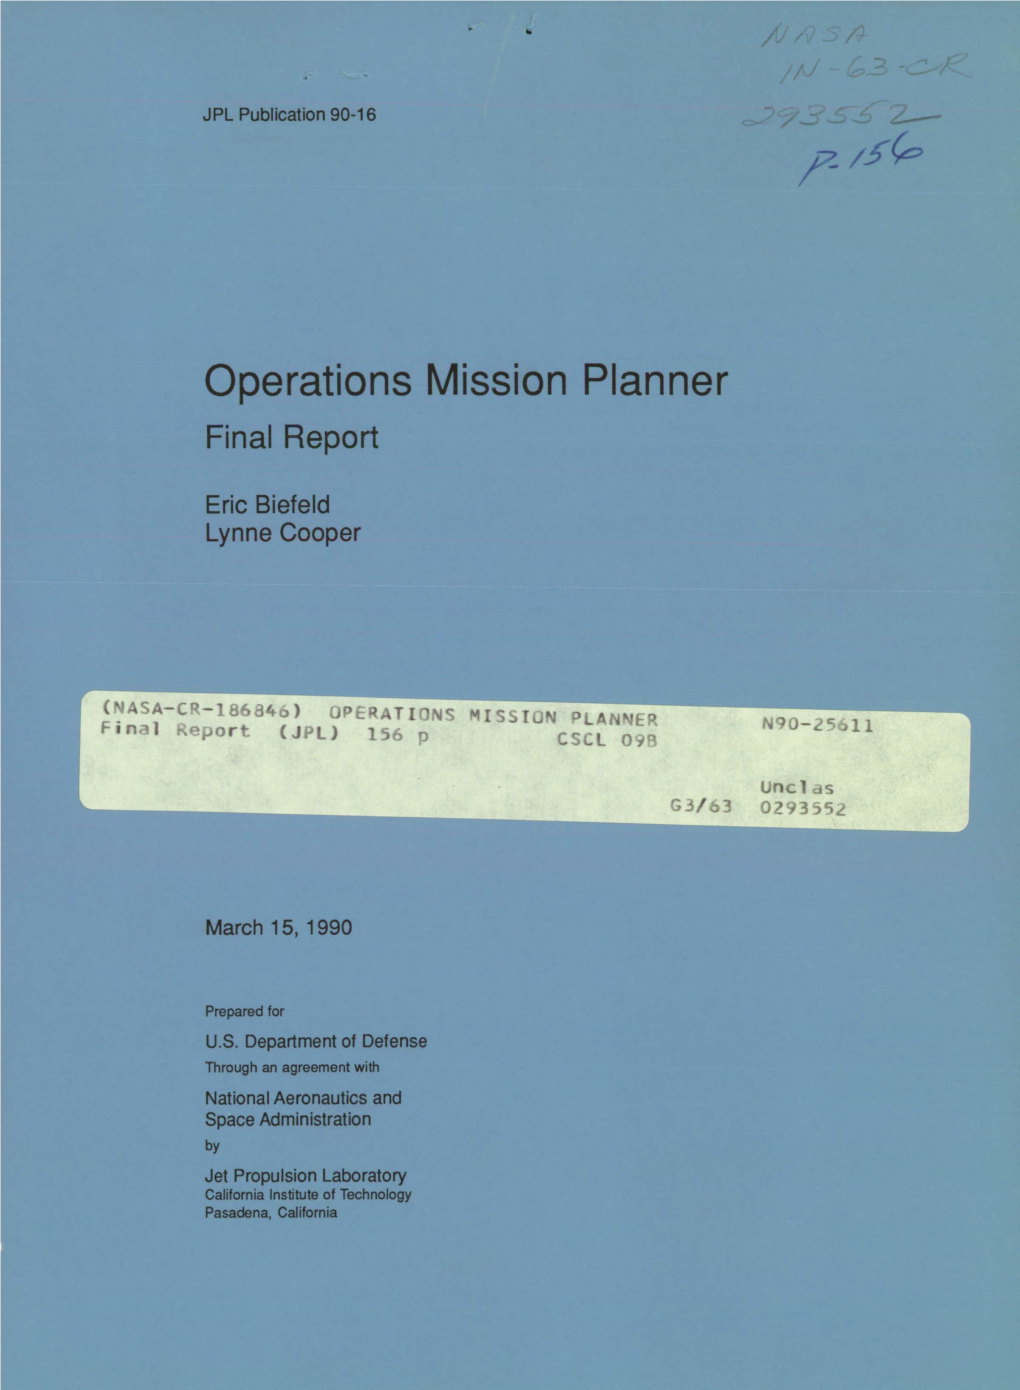 Operations Mission Planner Final Report